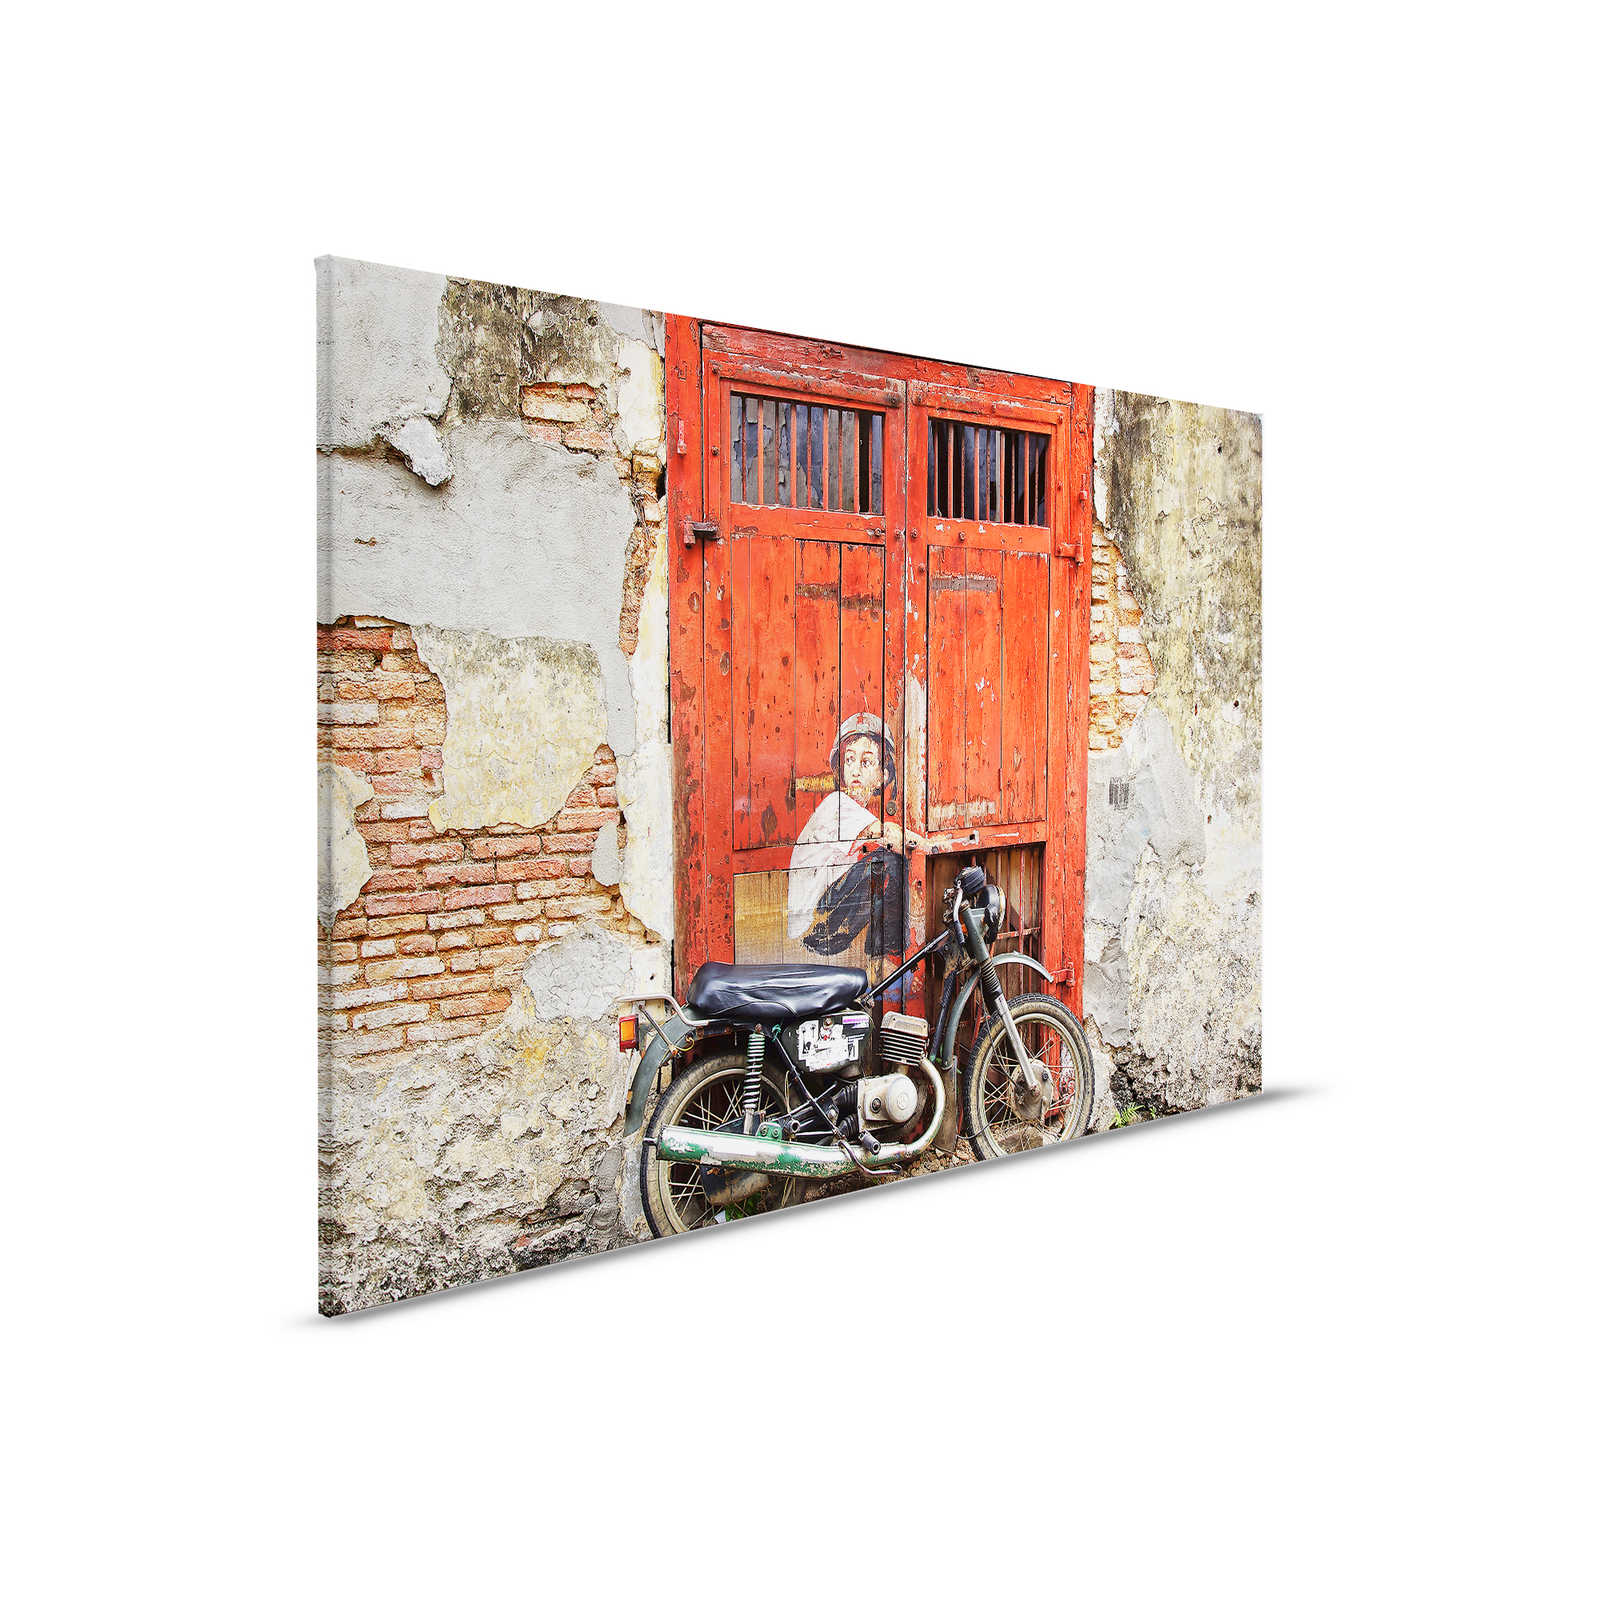         Canvas painting Vintage Door with Wall & Motorbike - 0,90 m x 0,60 m
    